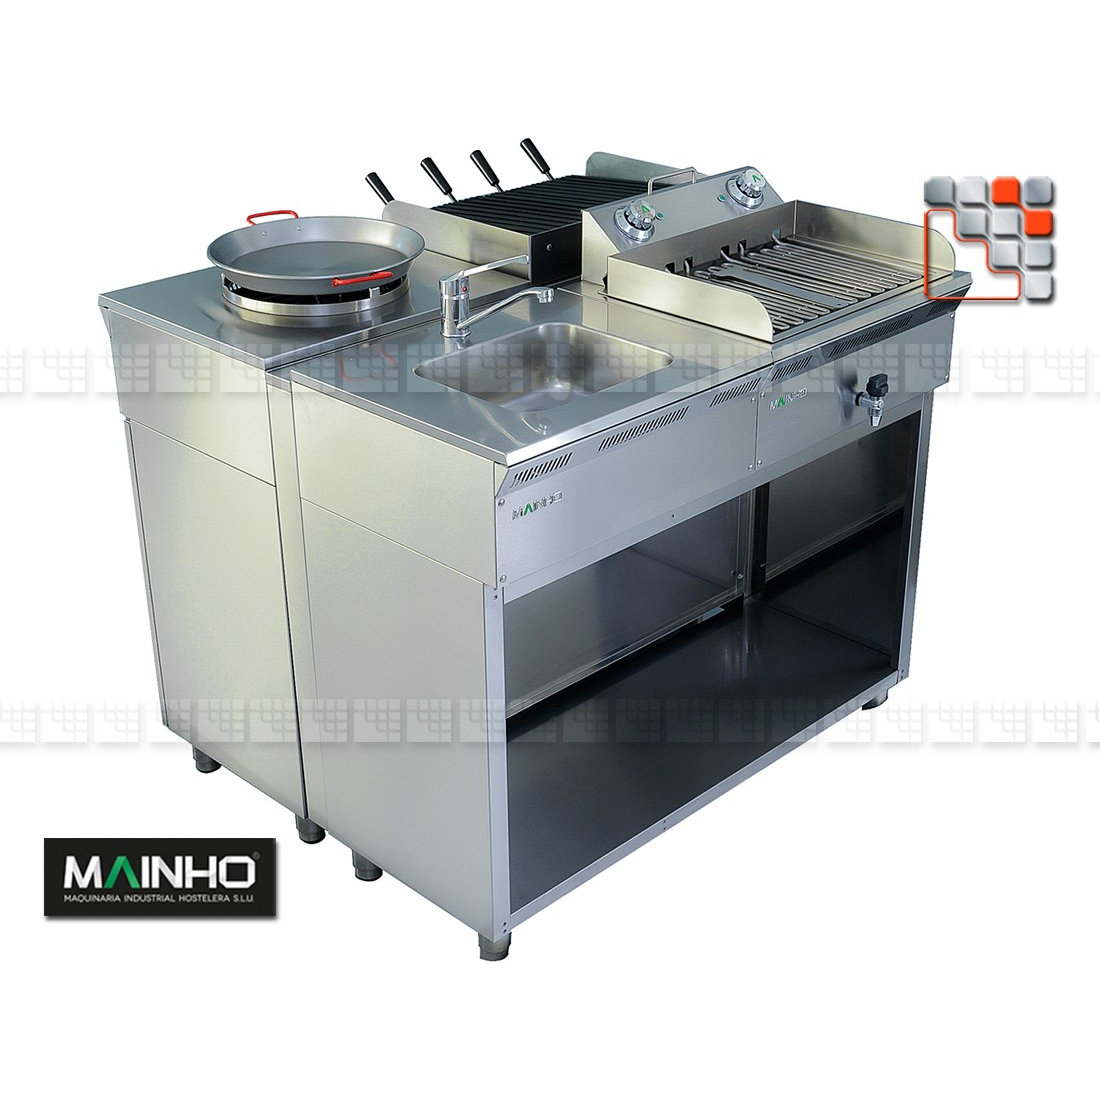 Stainless steel kitchen ECO -LINE 240 series MAINHO M04-ELX240 MAINHO® ECO -LINE range for Compact Kitchen or Food-Truck